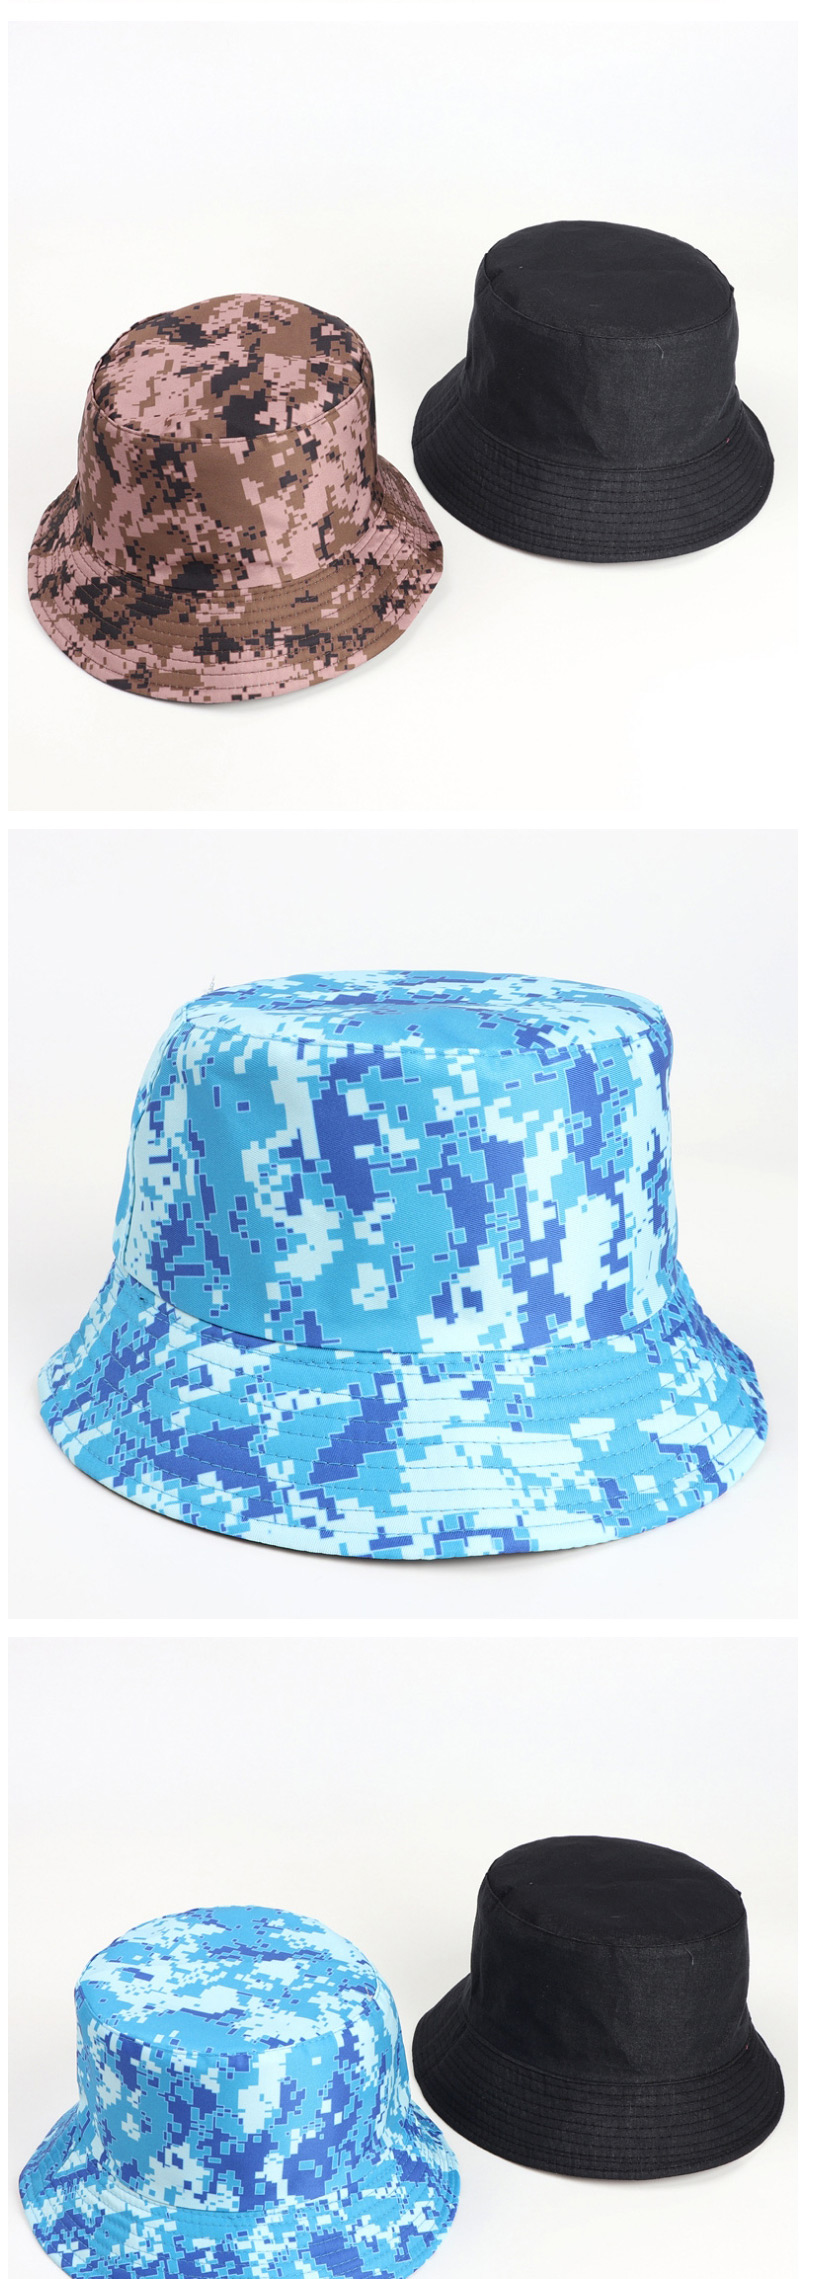 Fashion Army Green Printed Double-sided Multicolor Camouflage Fisherman Hat,Sun Hats